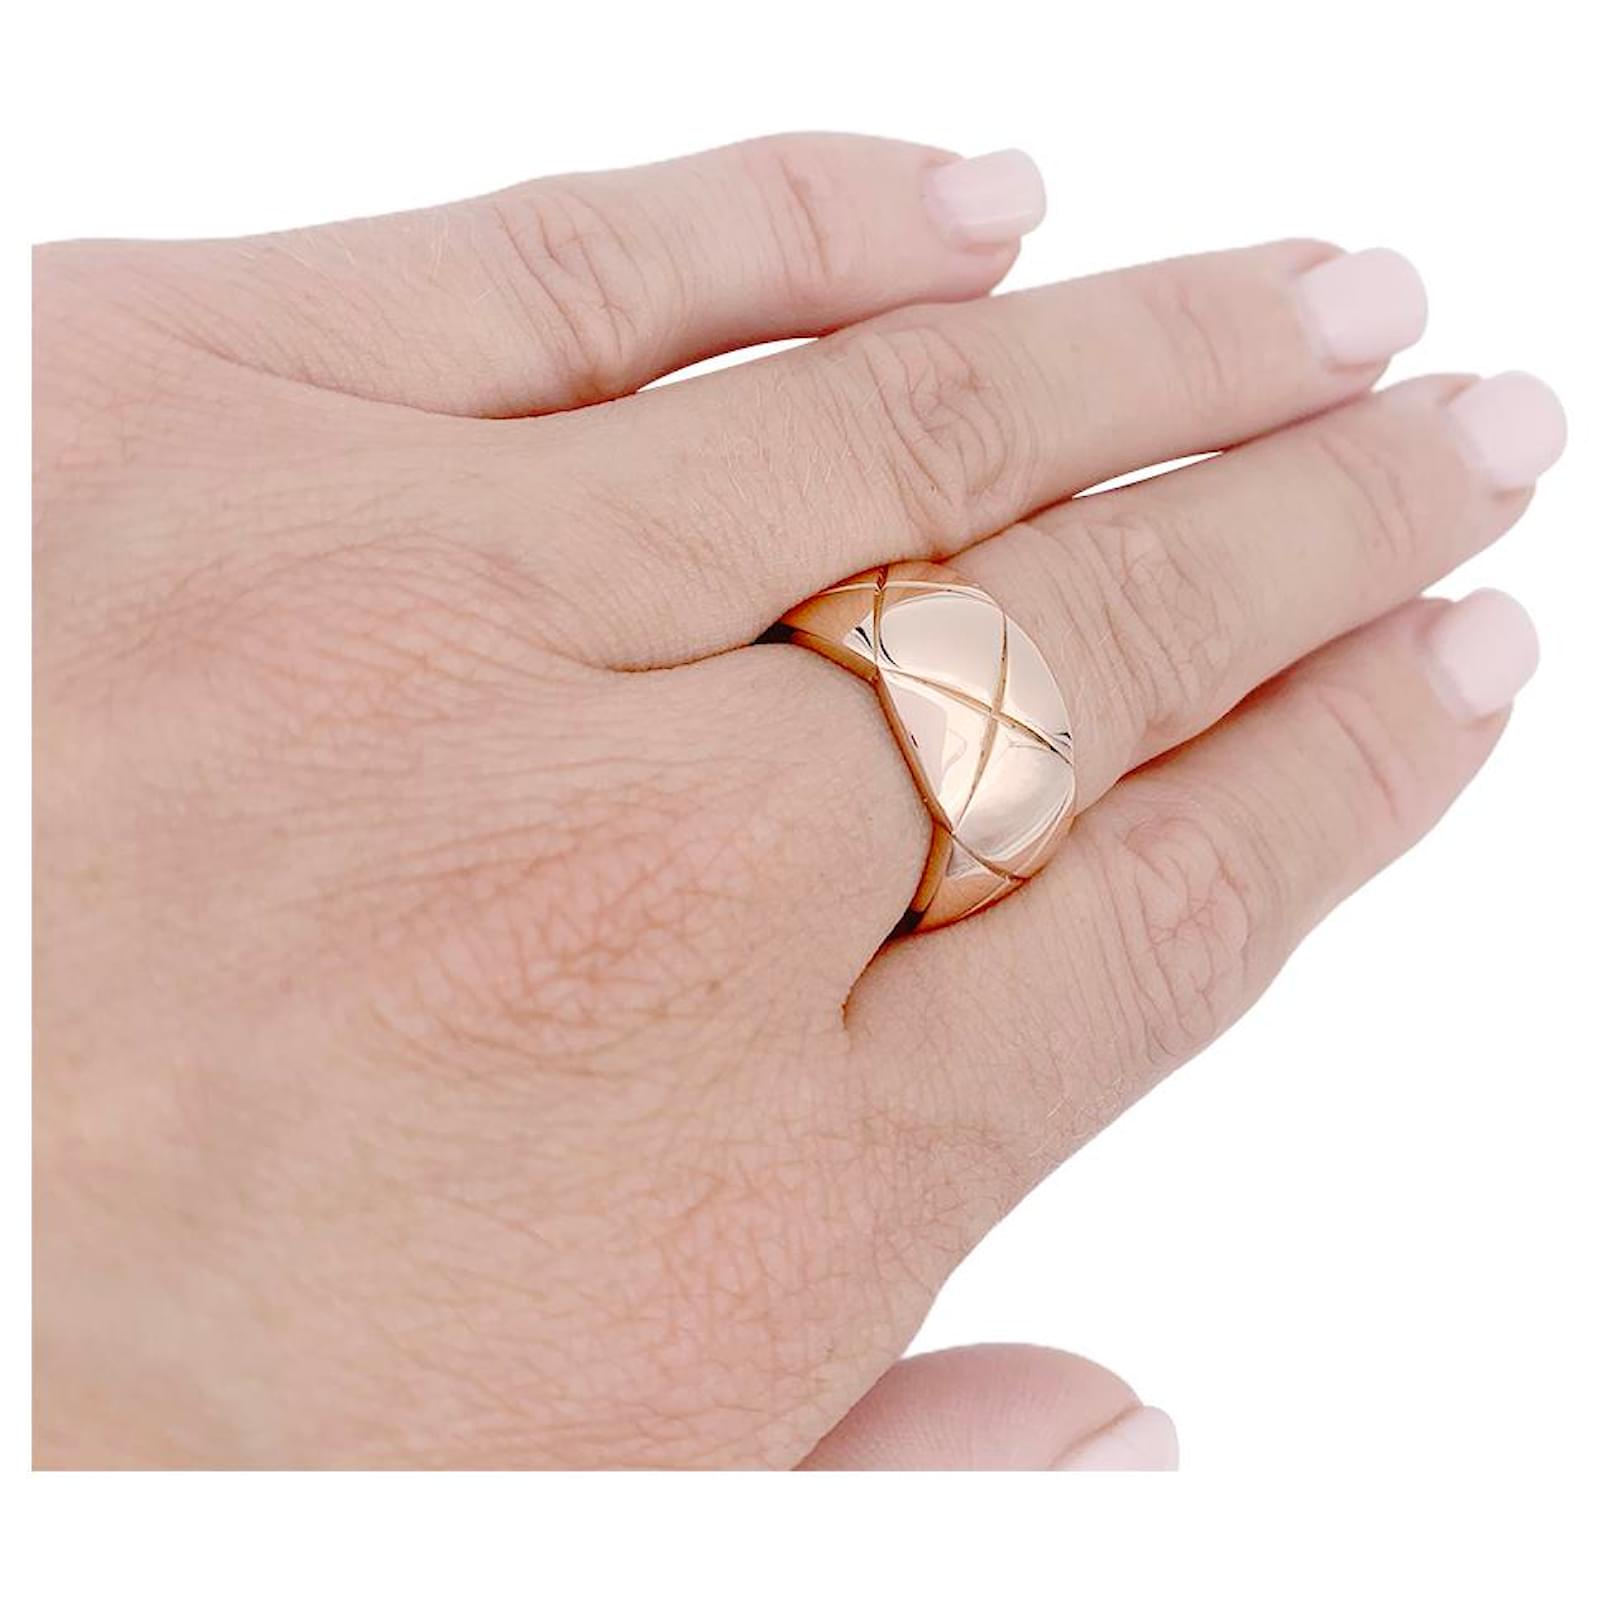 Chanel ring, Coco Crush, In rose gold. White gold Pink gold ref